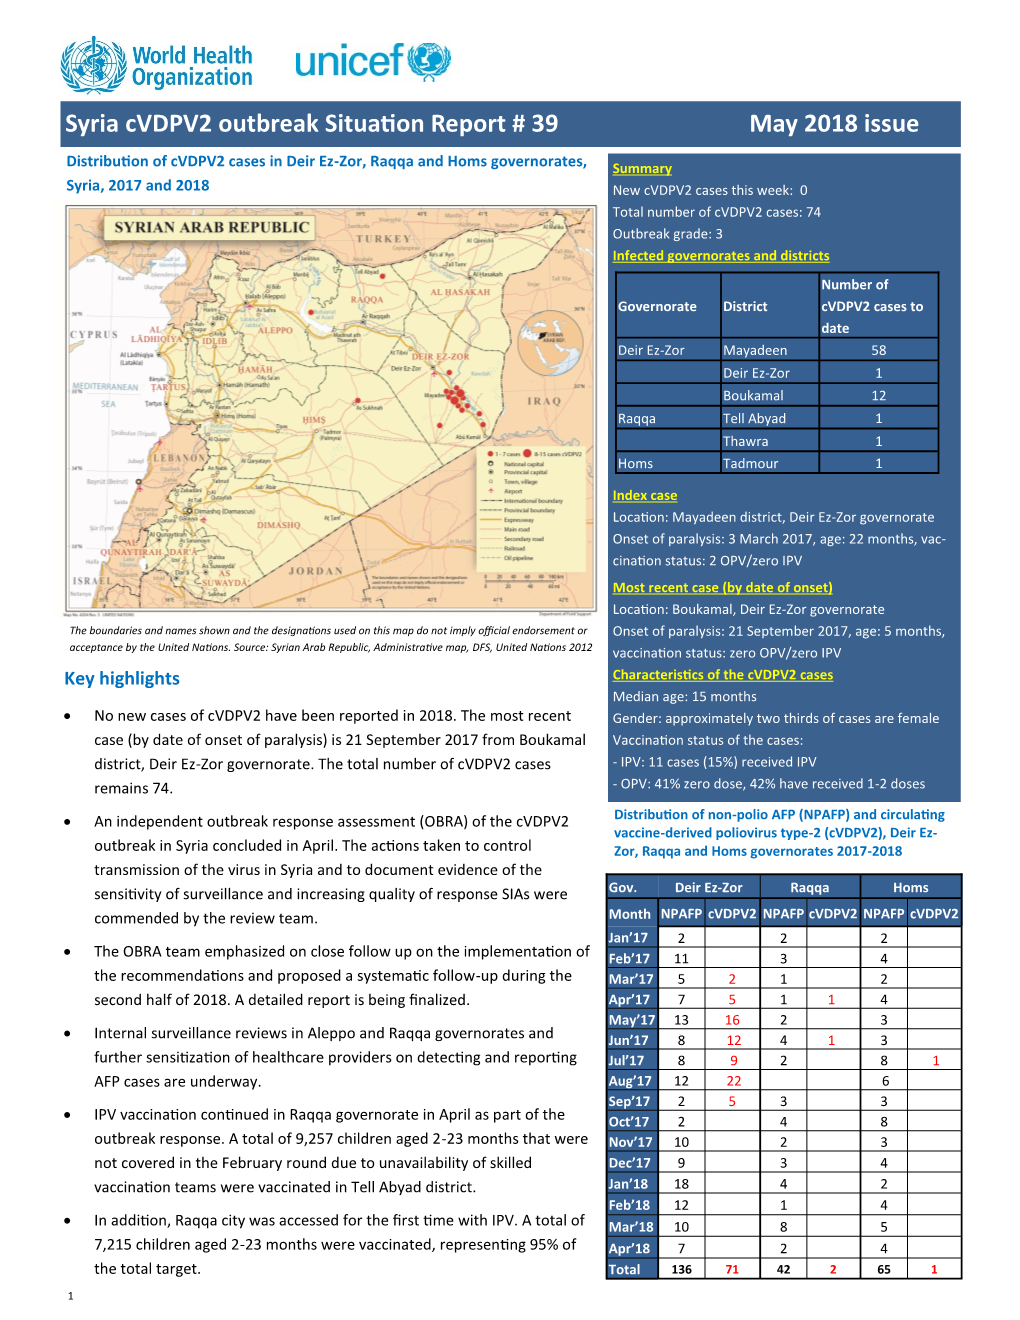 Syria Cvdpv2 Outbreak Situation Report 39, 31 May 2018